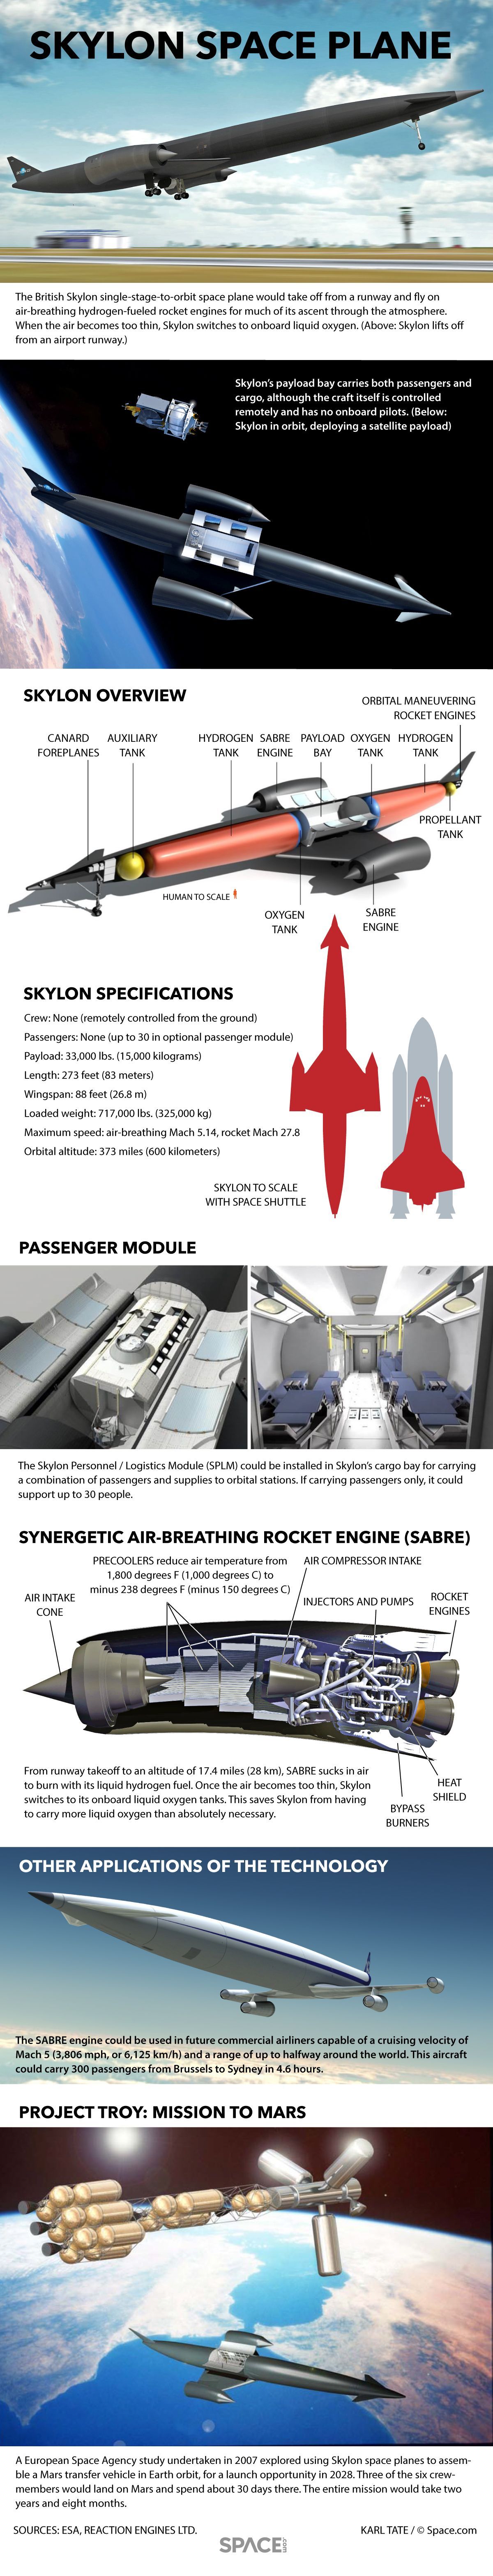 How the British Skylon Space Plane Works (Infographic) By Karl Tate, Infographics Artist – See more at: www.space.com/…